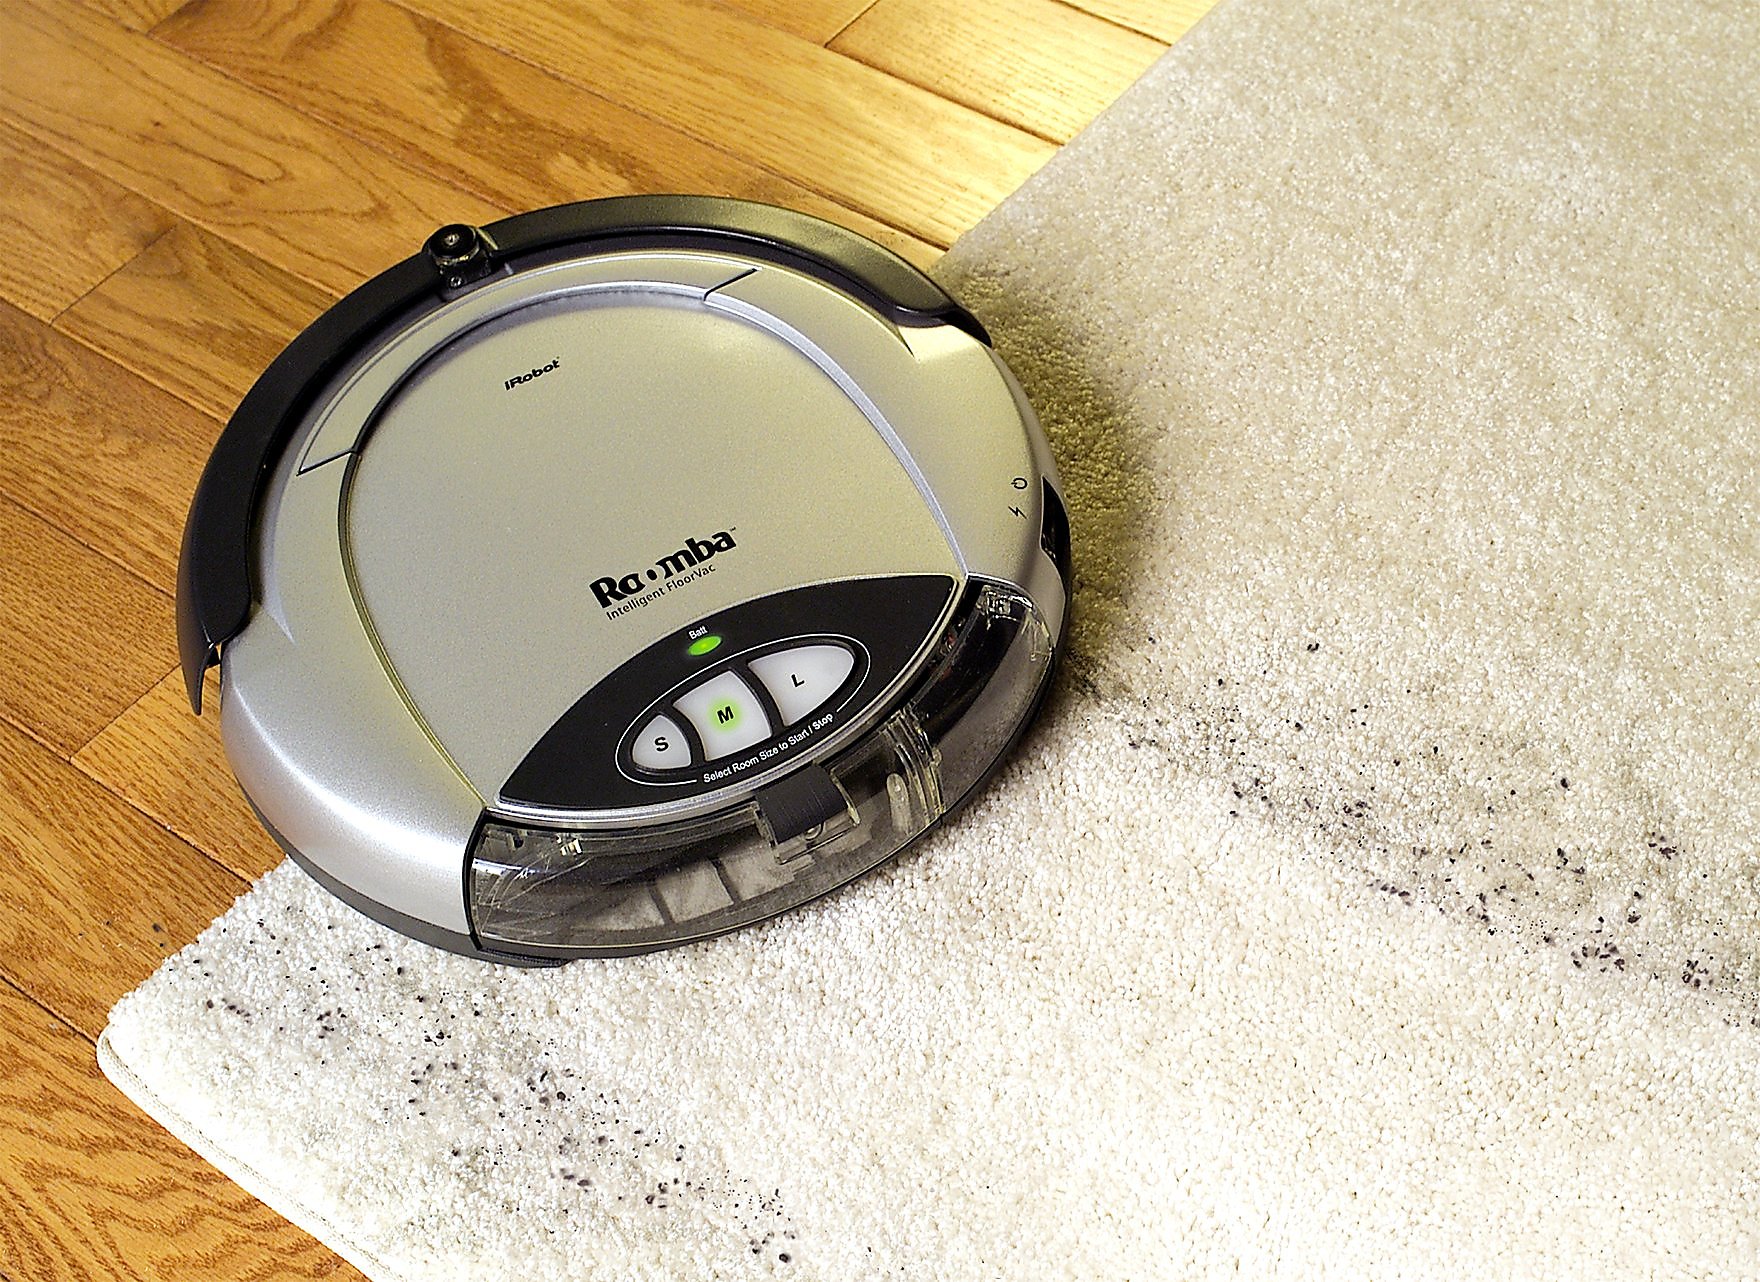 Your Roomba May Be Mapping Your Home, Collecting Data That Could Be Shared  - The New York Times